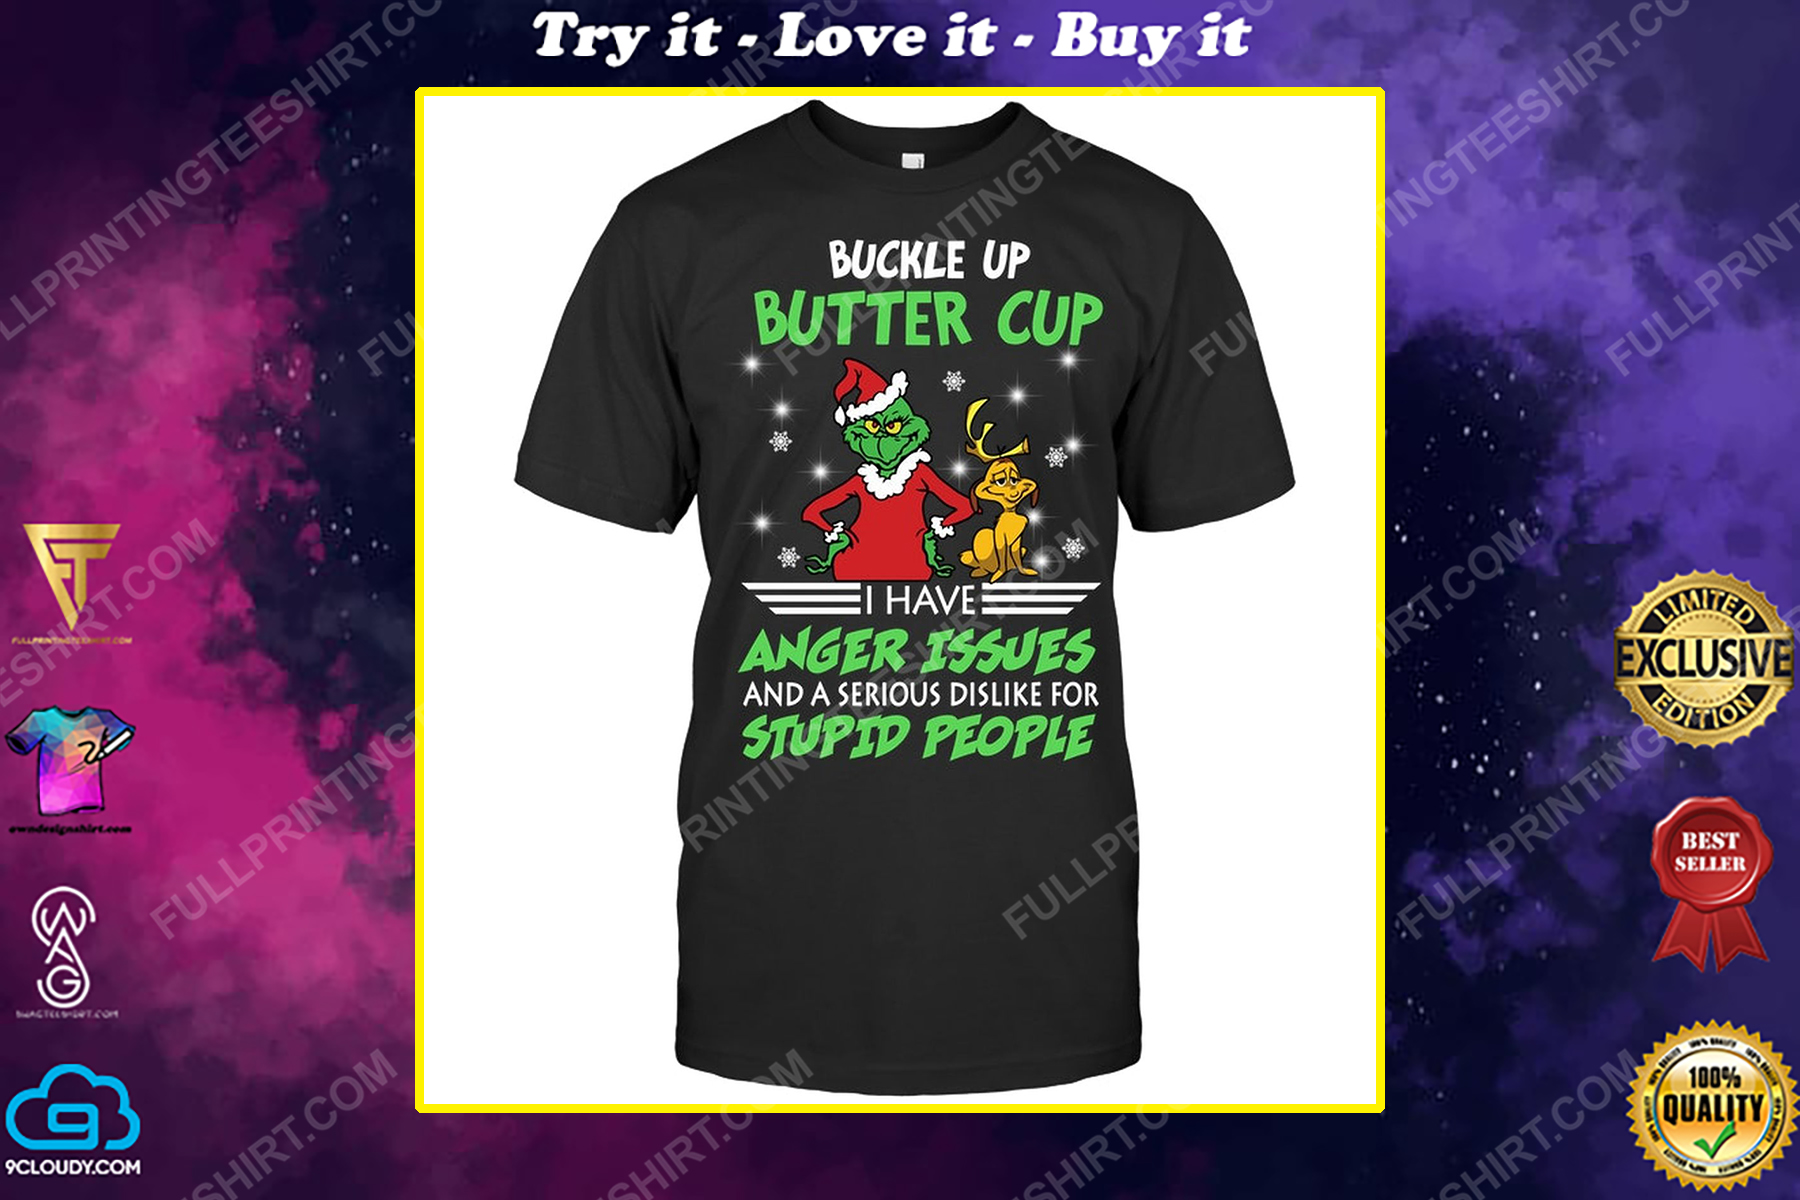 The grinch buckle the grinch up buttercup i have anger issues and a serious dislike for stupid people shirt